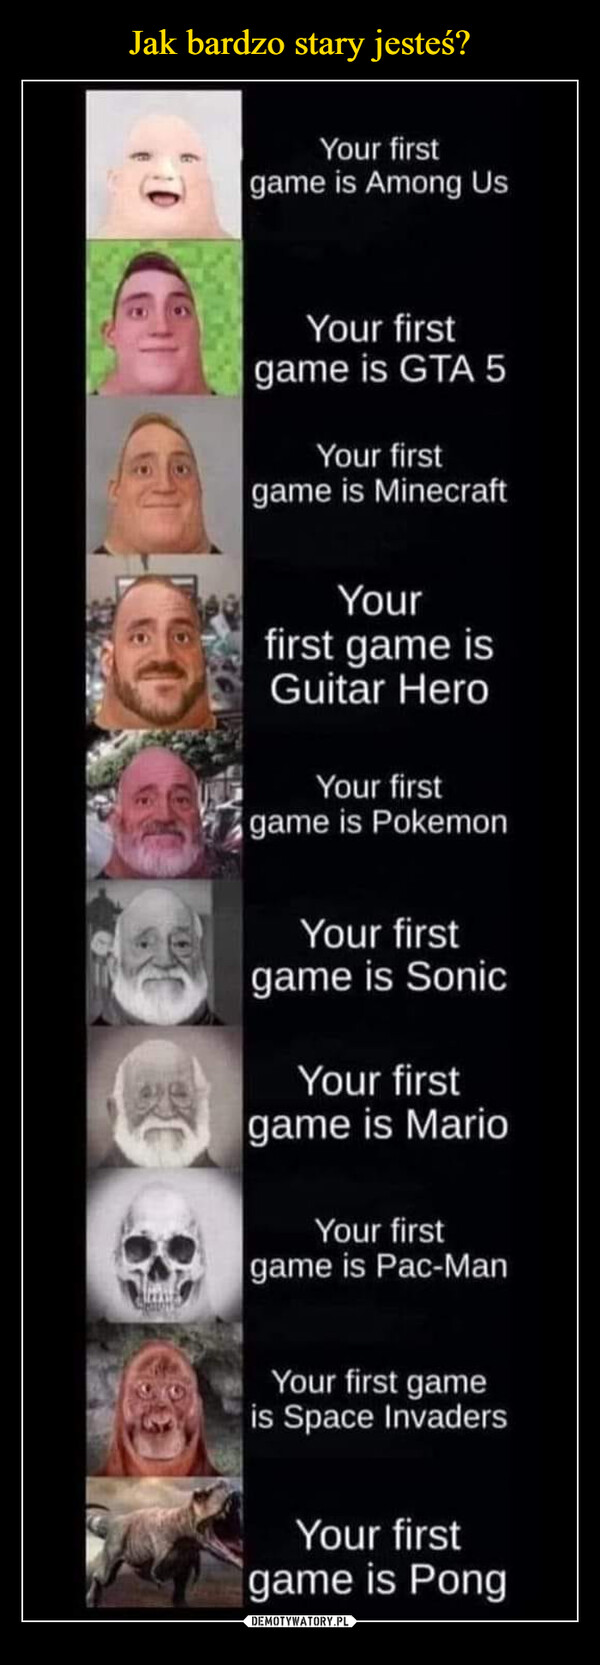  –  Your firstgame is Among UsYour firstgame is GTA 5Your firstgame is MinecraftYourfirst game isGuitar HeroYour firstgame is PokemonYour firstgame is SonicYour firstgame is MarioYour firstgame is Pac-ManYour first gameis Space InvadersYour firstgame is Pong